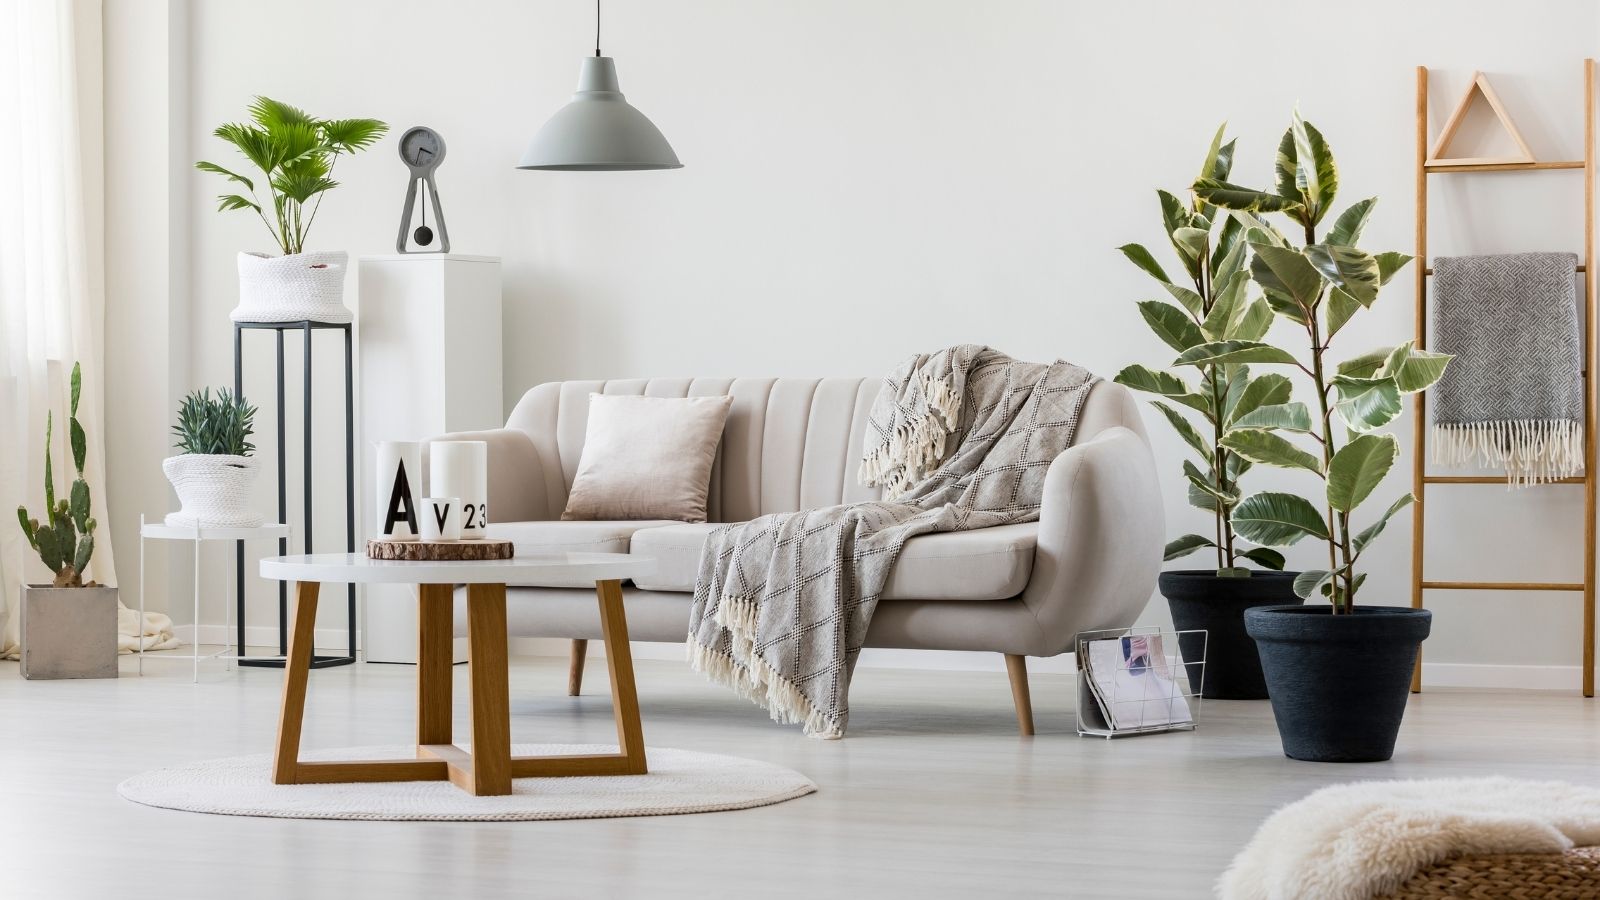 Where Is The Best Home Decor Trends 2021?